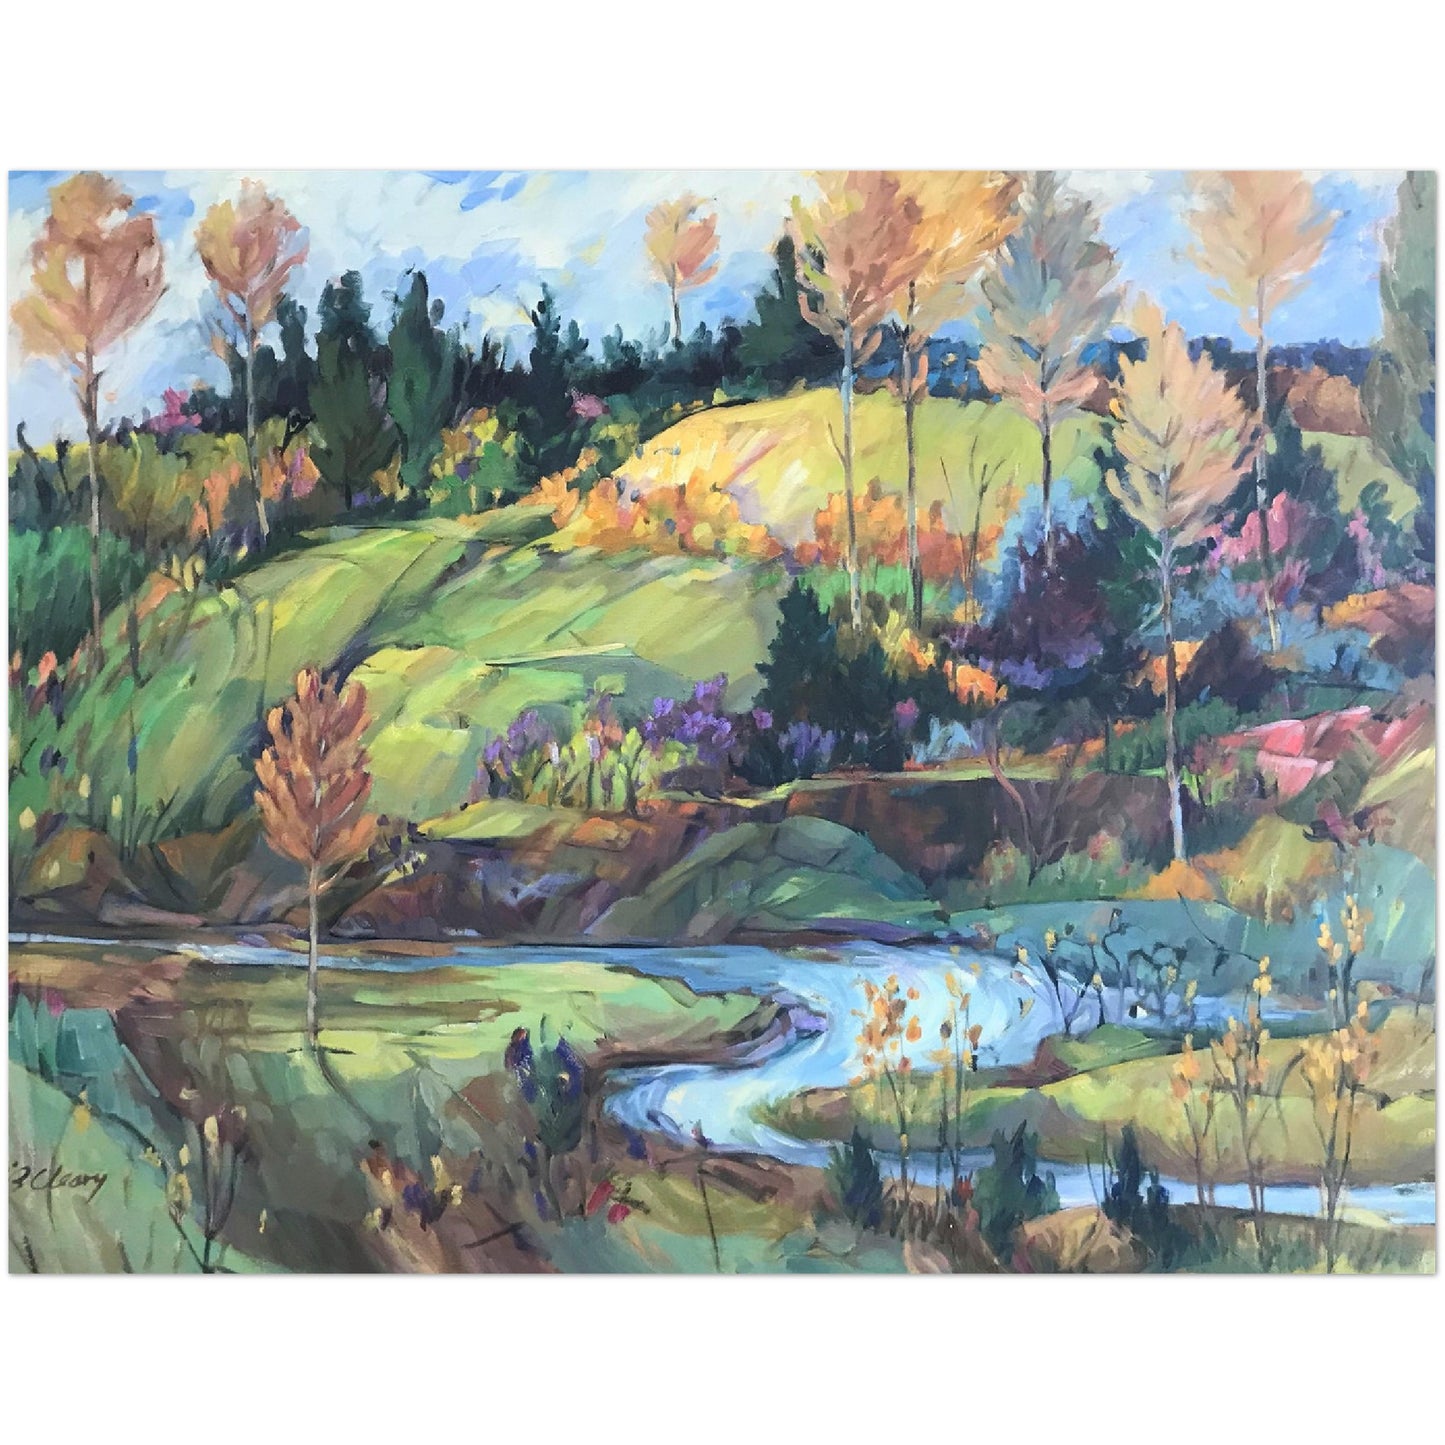 "Golden Fall" Landscape Pack of 10 postcards (2-sided, No envelopes, US & CA) by Barbara Cleary Designs